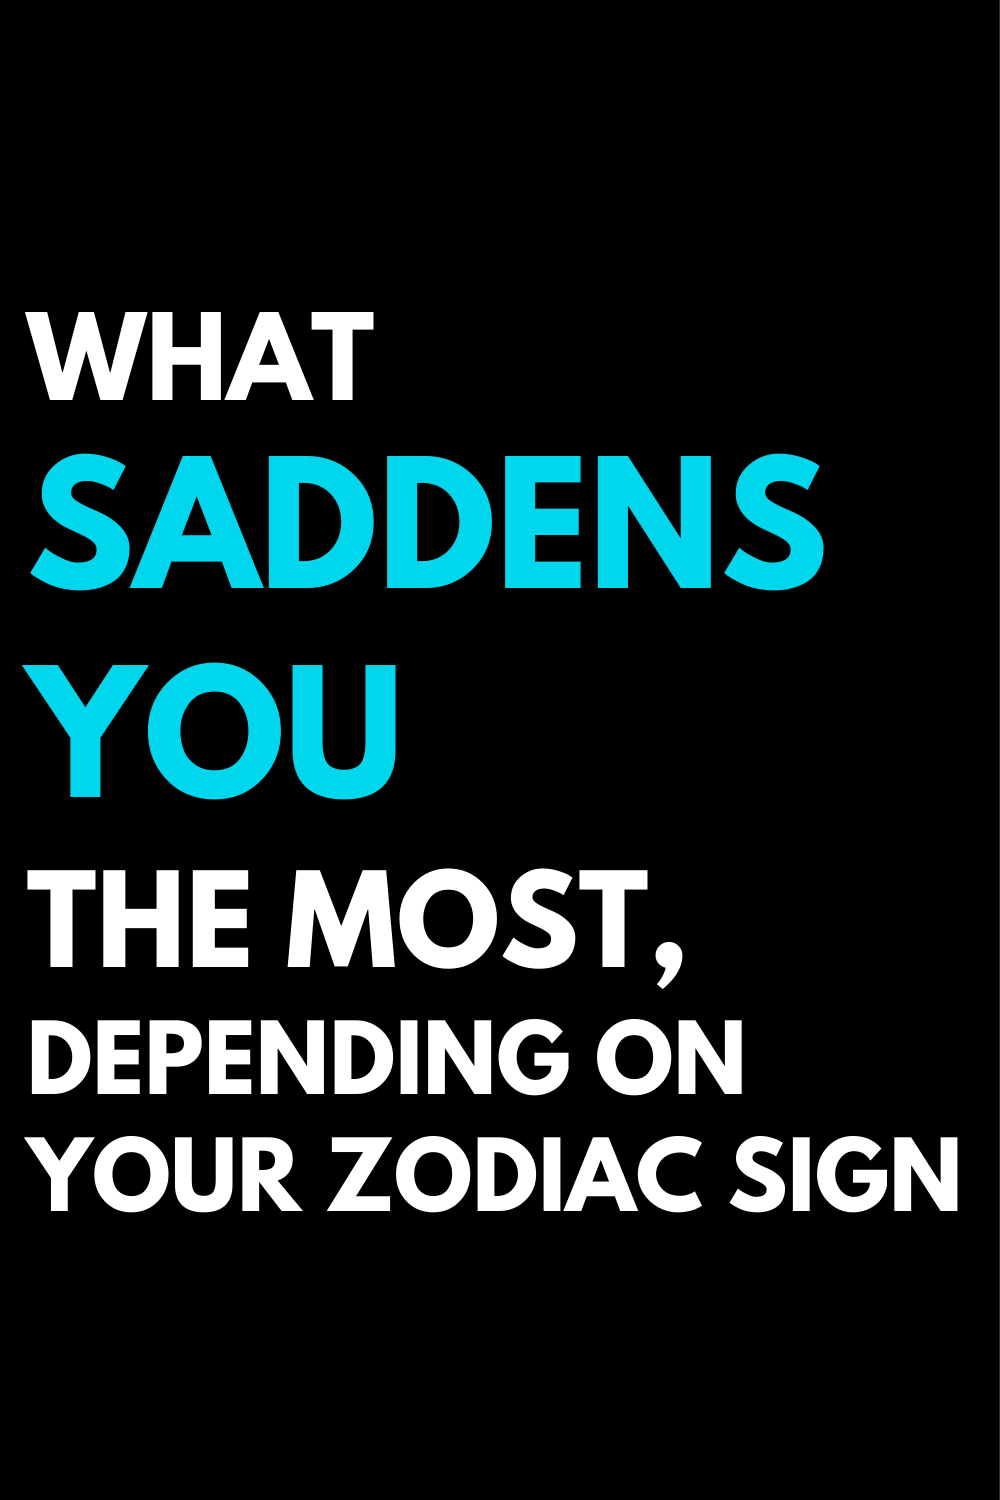 What saddens you the most, depending on your zodiac sign